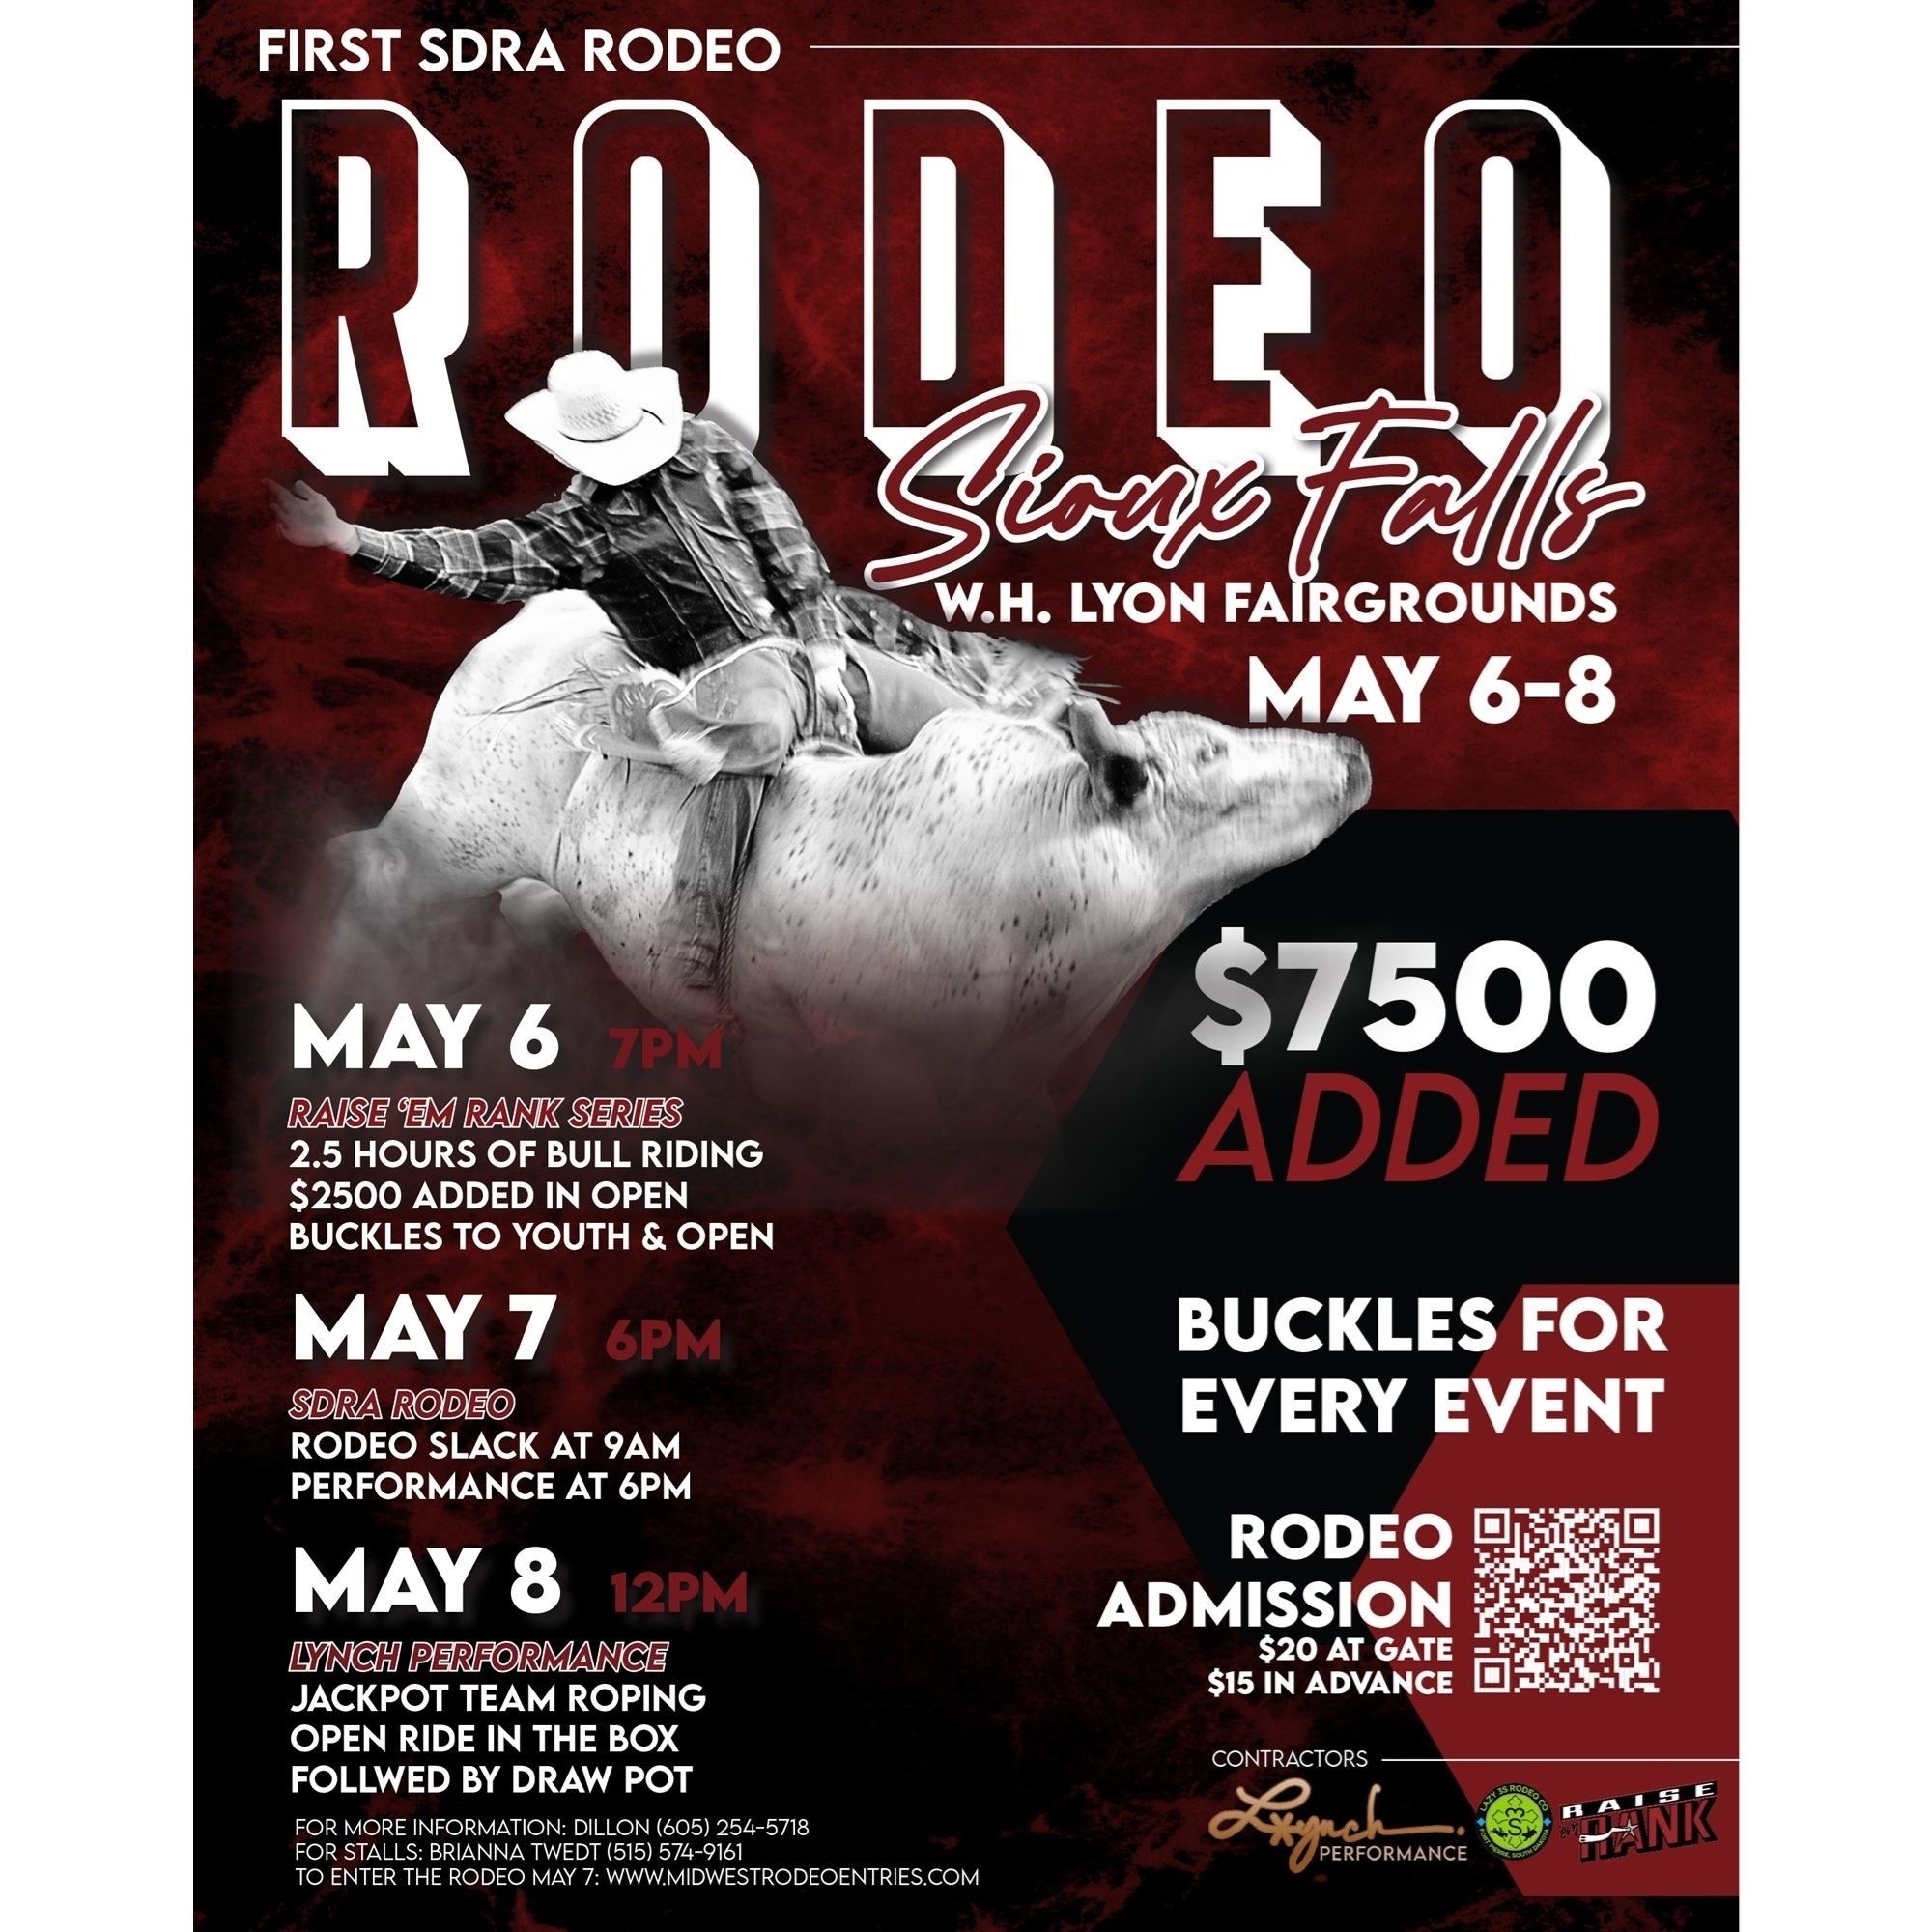 Sioux Falls Rodeo